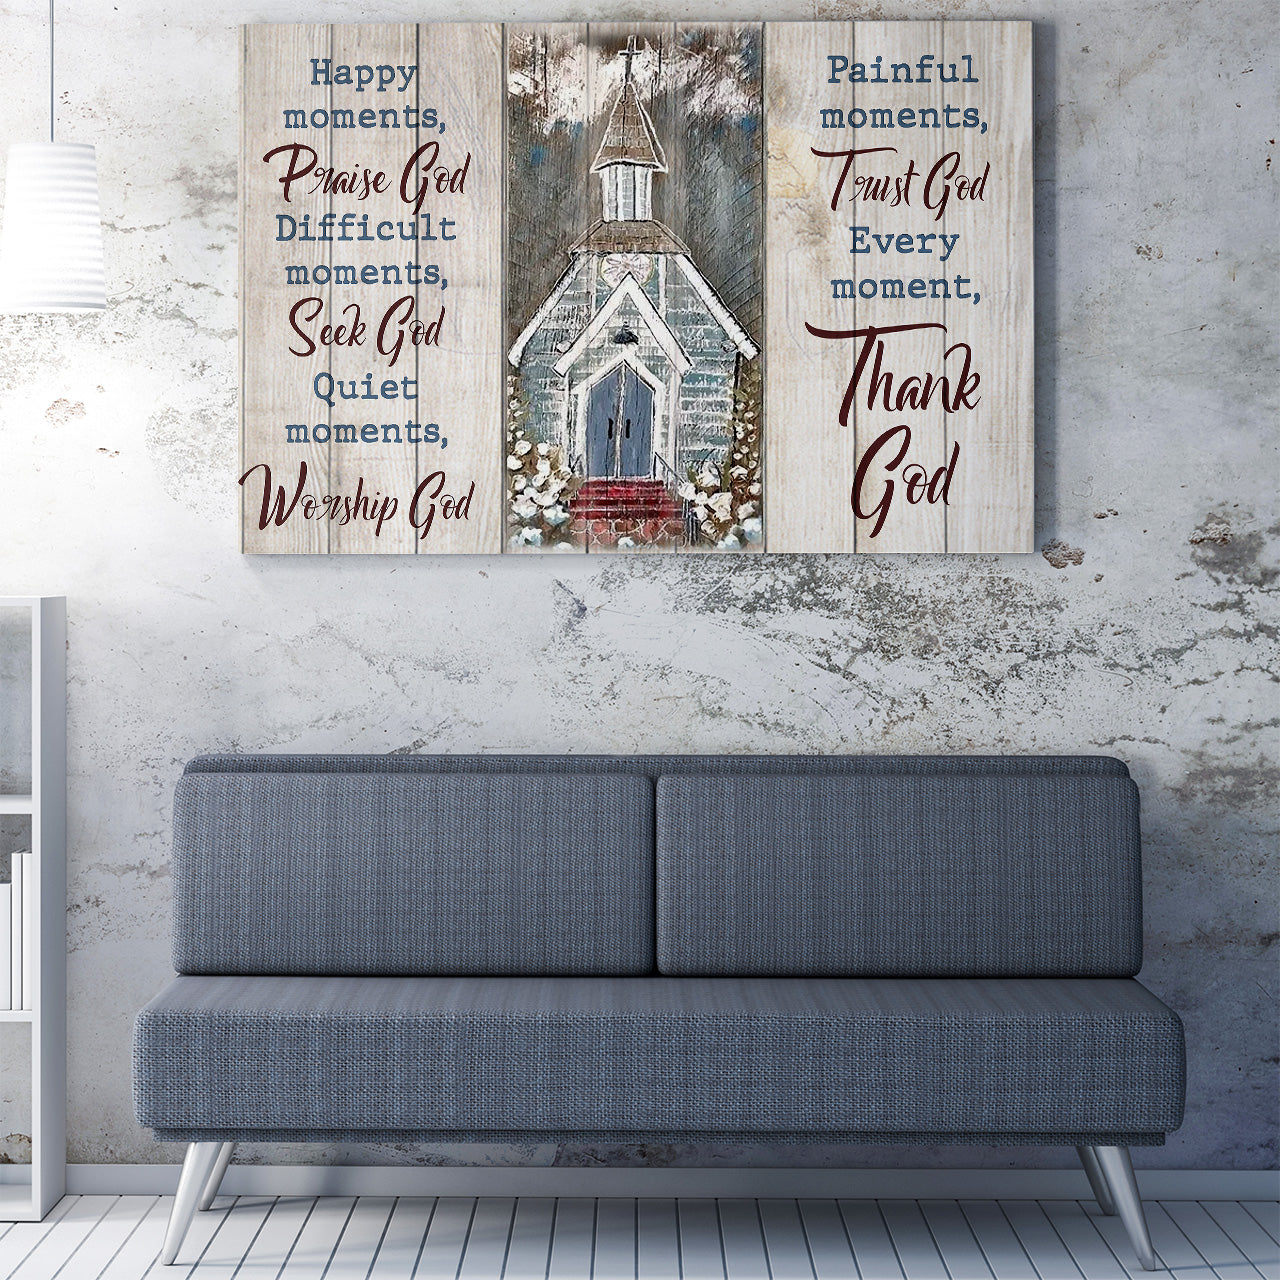 God Canvas Decoration Home, Happy, Dificult, Quiet, Painful, Every Moment With God